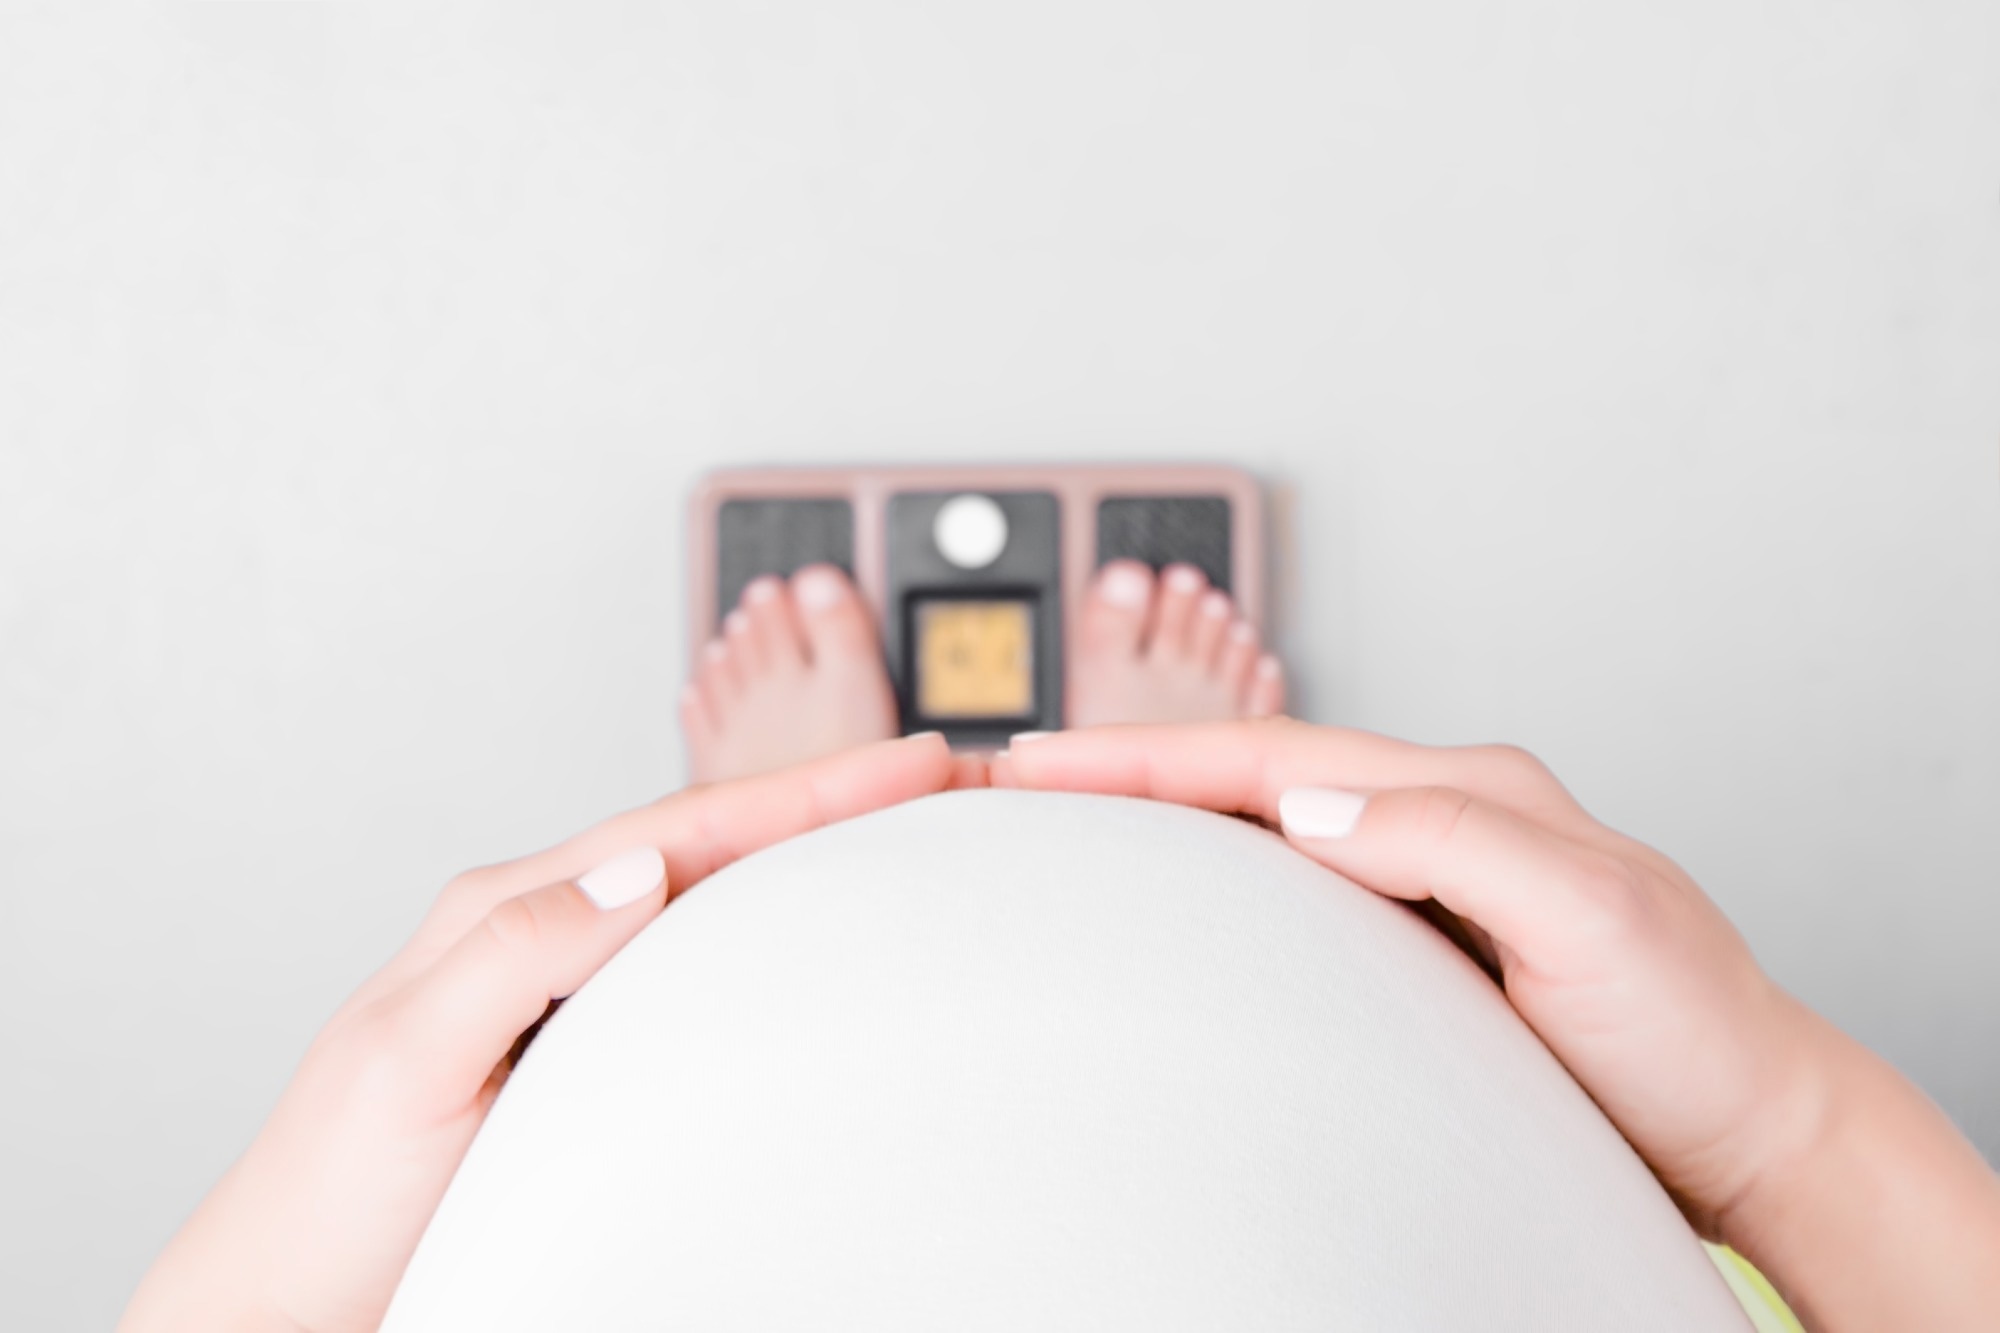 Study: Prepregnancy overweight and obesity and long-term risk of venous thromboembolism in women. Image Credit: FotoDuets/Shutterstock.com